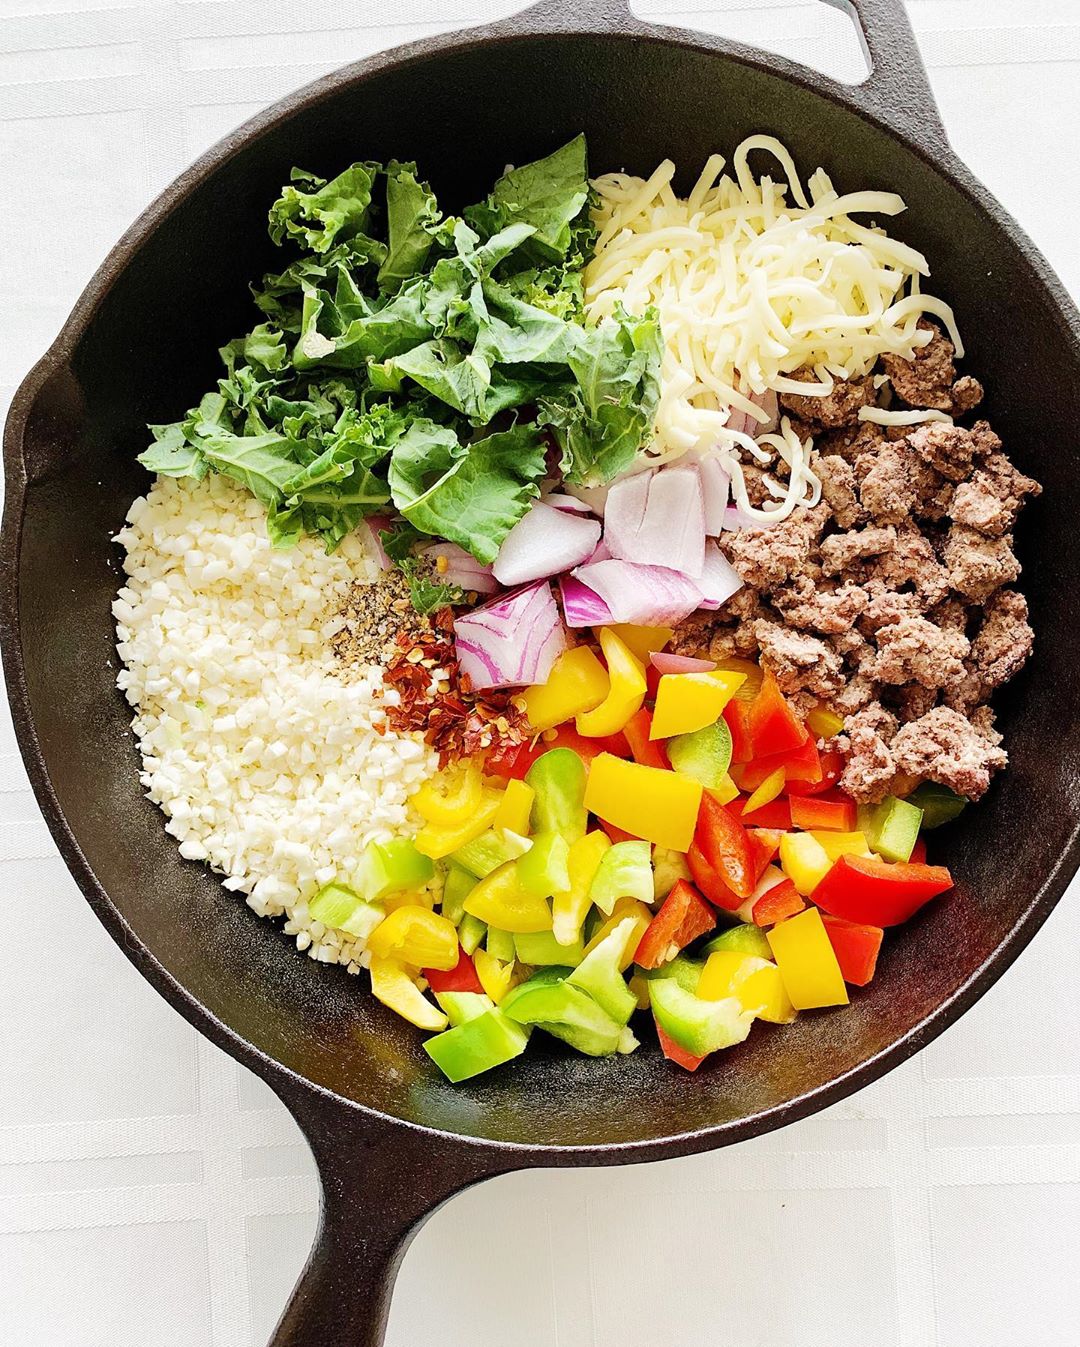 Taco skillet!!  So easy but looks fancy 
•
•
Made it with #thatformula as per usual! 
•
•
 4-5 oz protein (4 oz ground turkey or beef)
🥬 2+ cups veg (1 cup cauliflower rice + 1 bell pepper, diced + 1/4 onion + 1 cup kale)
🧀 100-200 calories of fats (1/3 cup shredded cheese)
🧂 Season with salt, pepper, and red pepper flakes! It’s spicy!!!
‍ Cook the ground beef first, then add in the other ingredients. Use an oil spray instead of cooking with oil. THE END! 
•
•
Get my FREE meal plan - linked in bio! 
•
•
#collegenutritionist #BestBodyBabes #1starchPerDay #schooldays #weightlosshelp #weightlossresults #weightlossplan #healthyswap #healthyeating #healthyfoodideas #gogreek #collegefood #collegecooking #collegefoodie #lowcarbrecipes #lowcarblove #lowcarbeating #lowcarbfoods